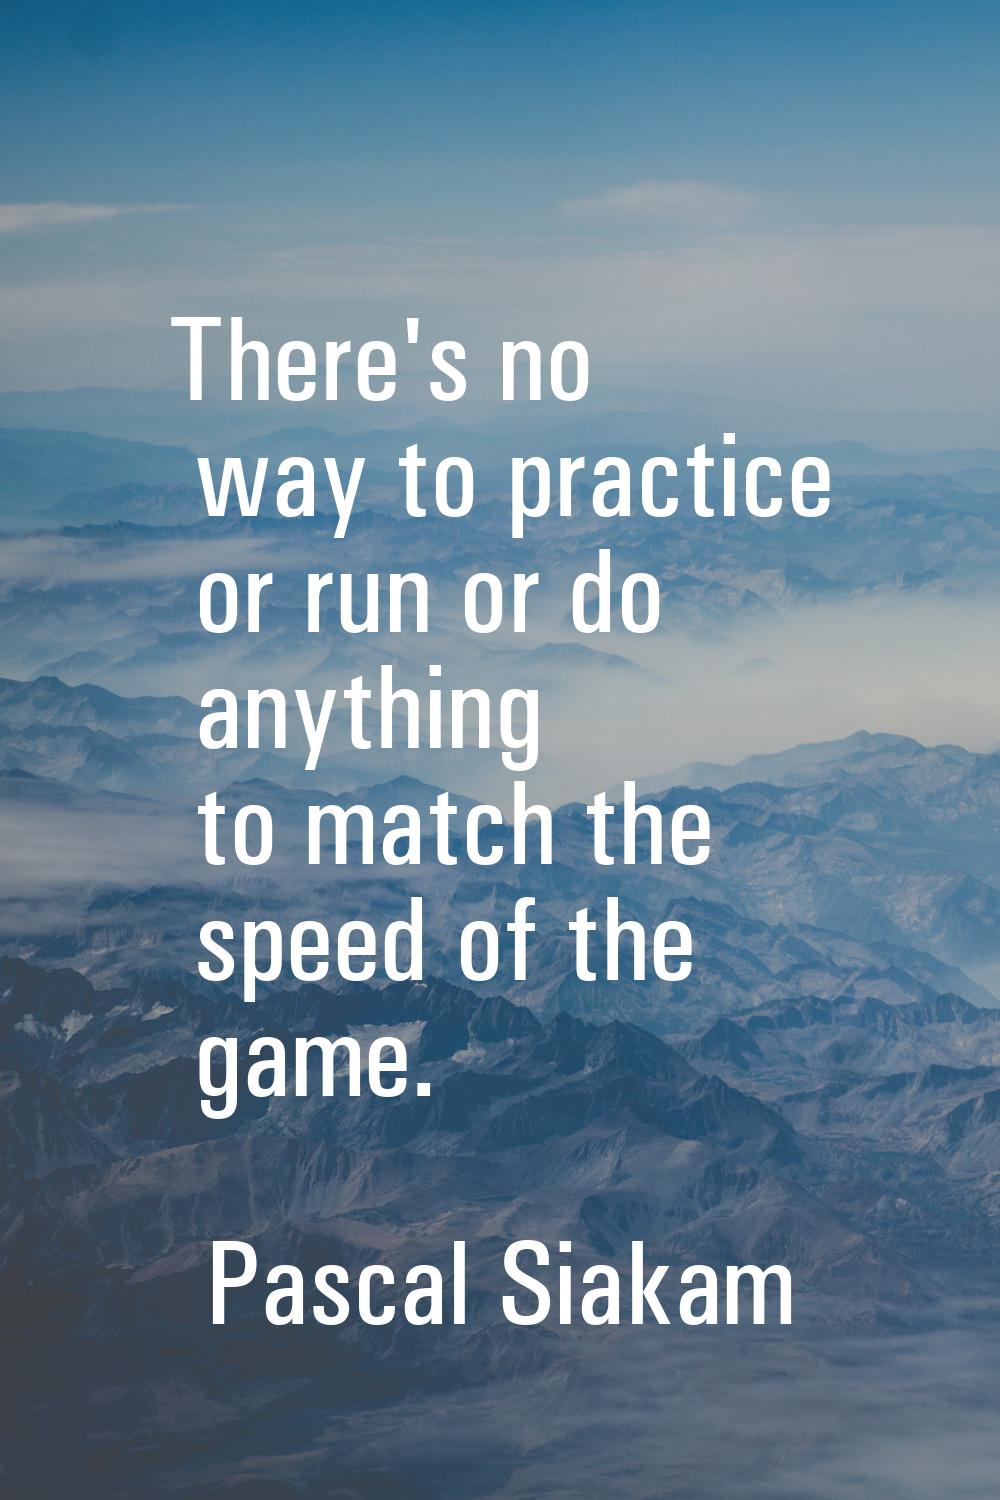 There's no way to practice or run or do anything to match the speed of the game.